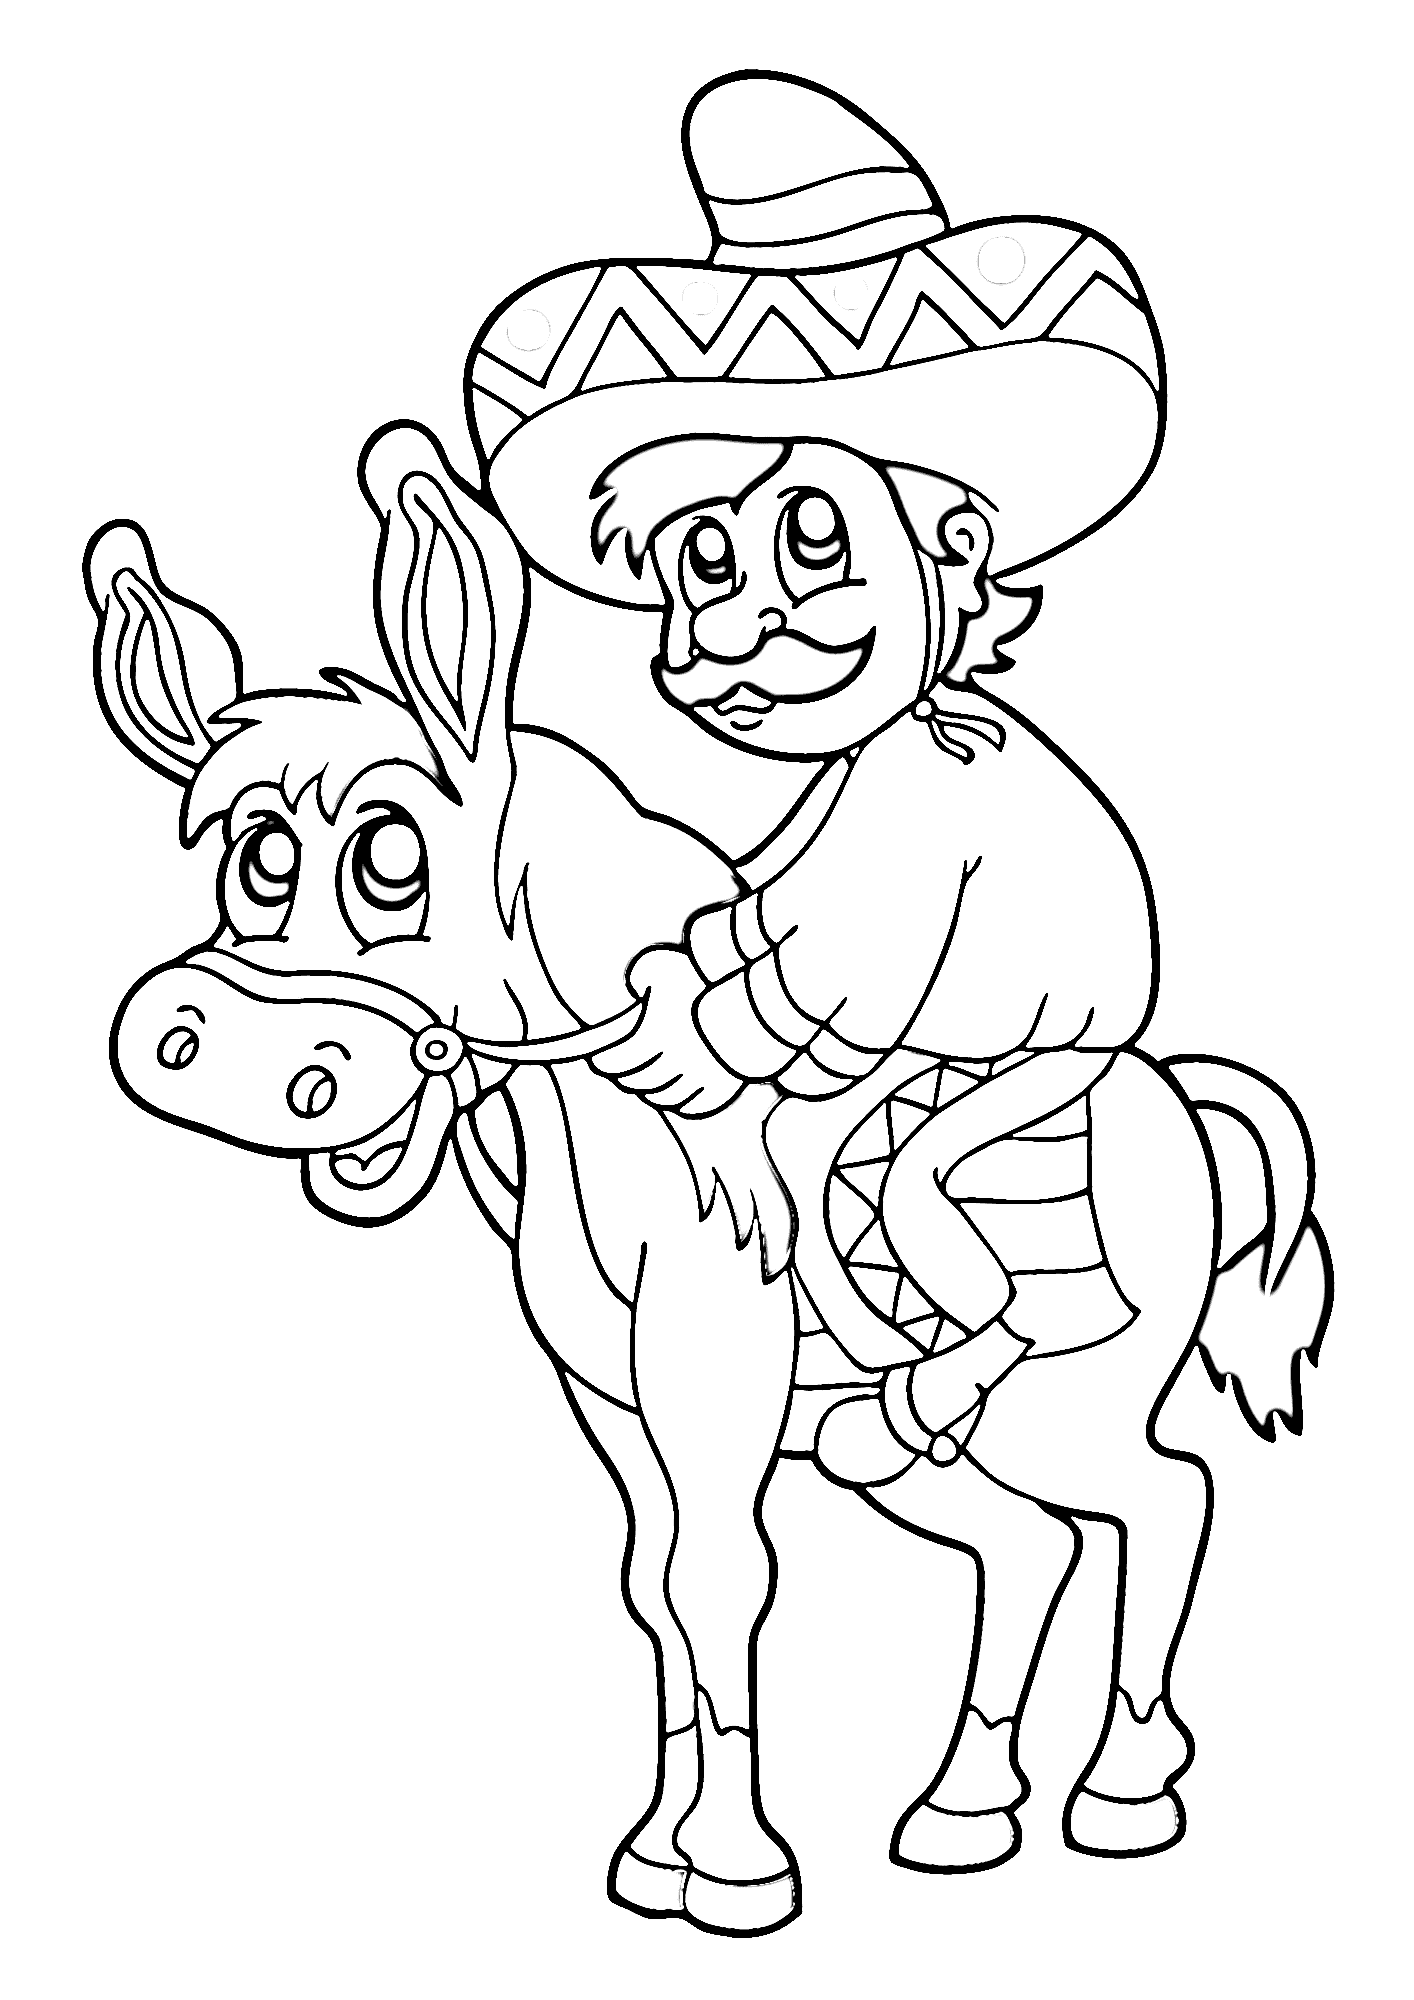 Mexican Riding Donkey Coloring Page